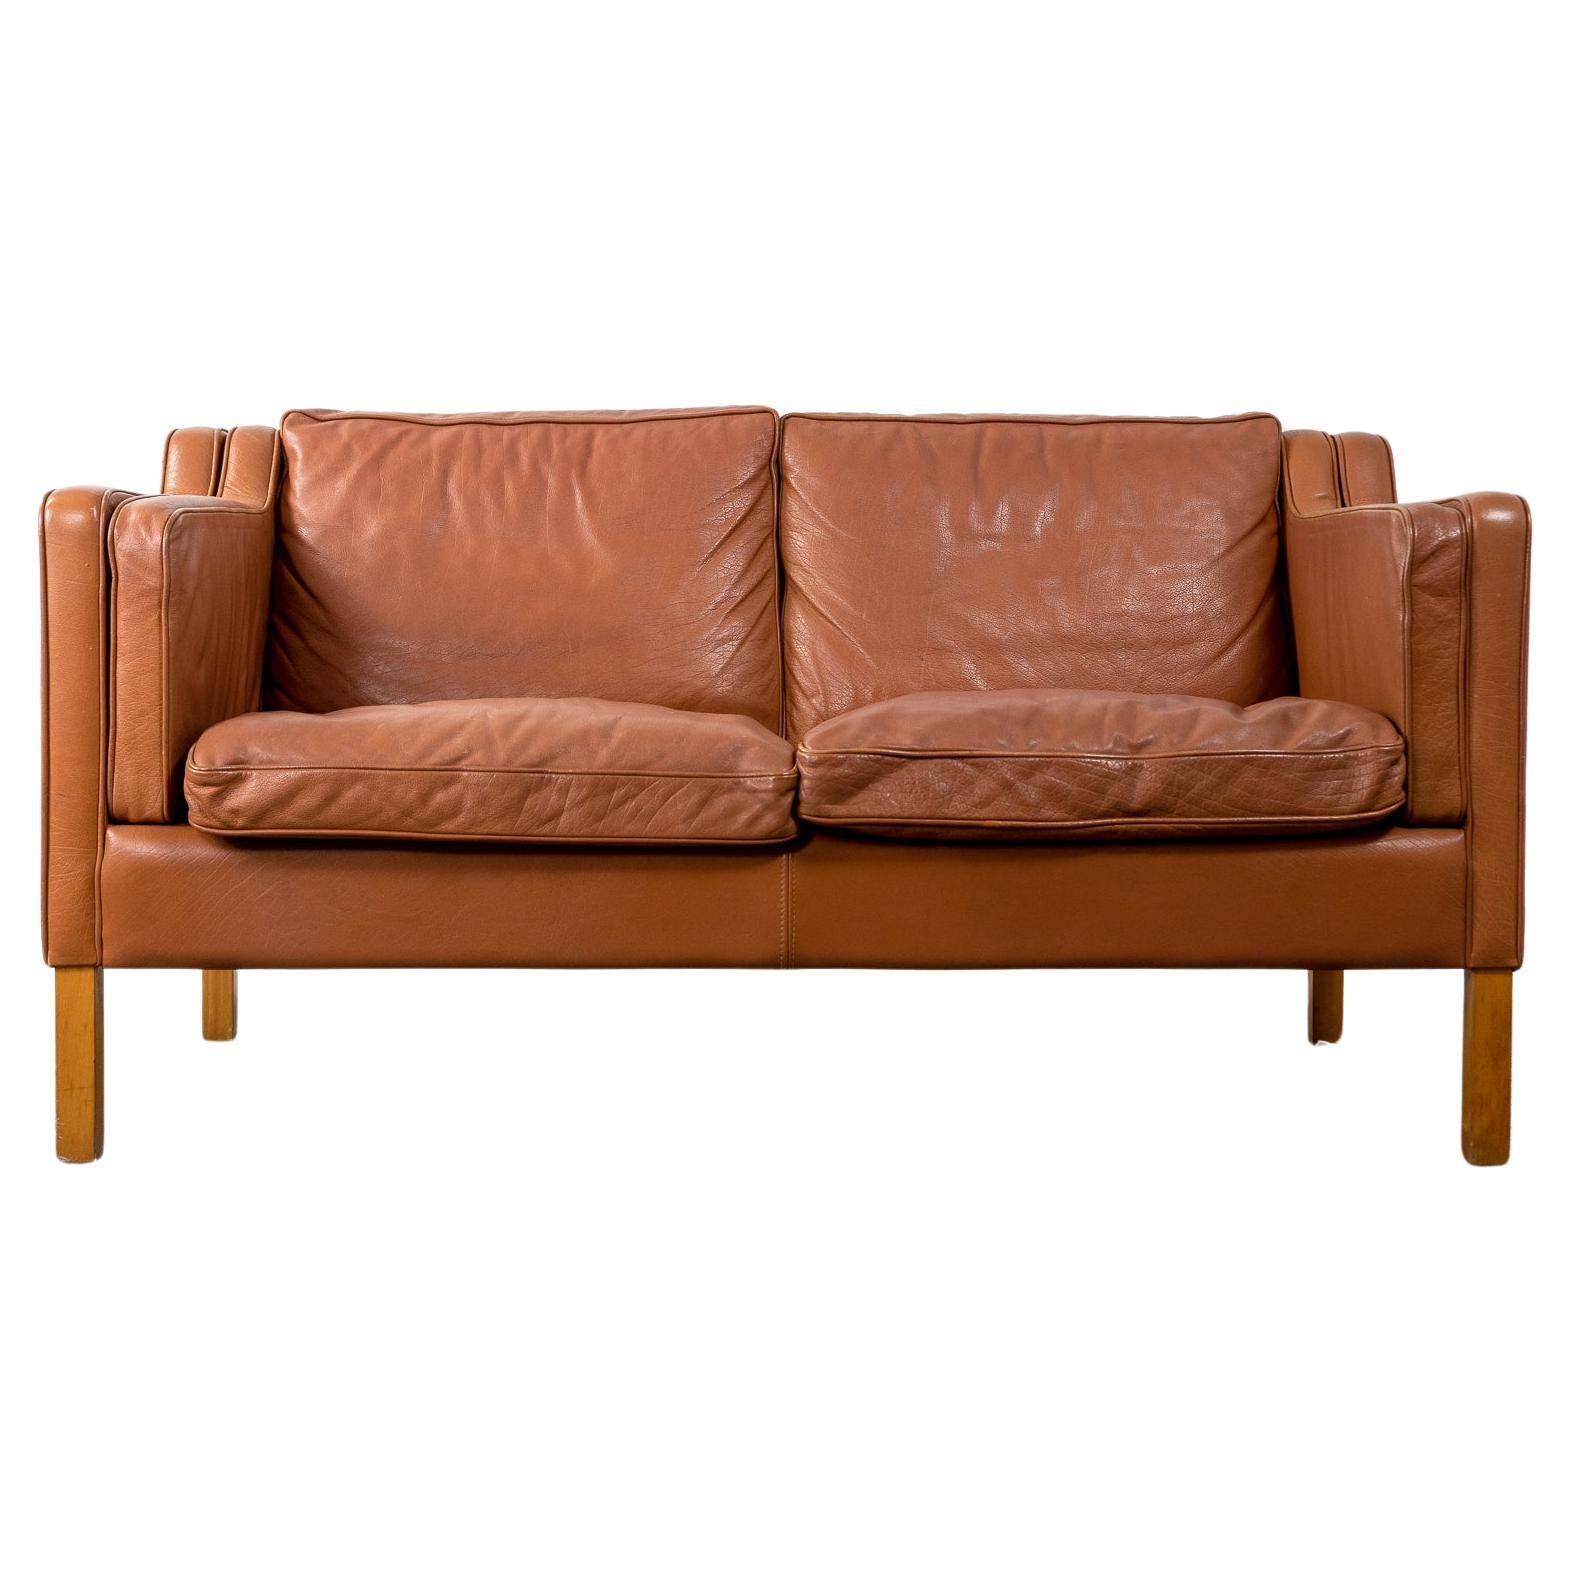 Danish Modern Leather Loveseat by Stouby For Sale